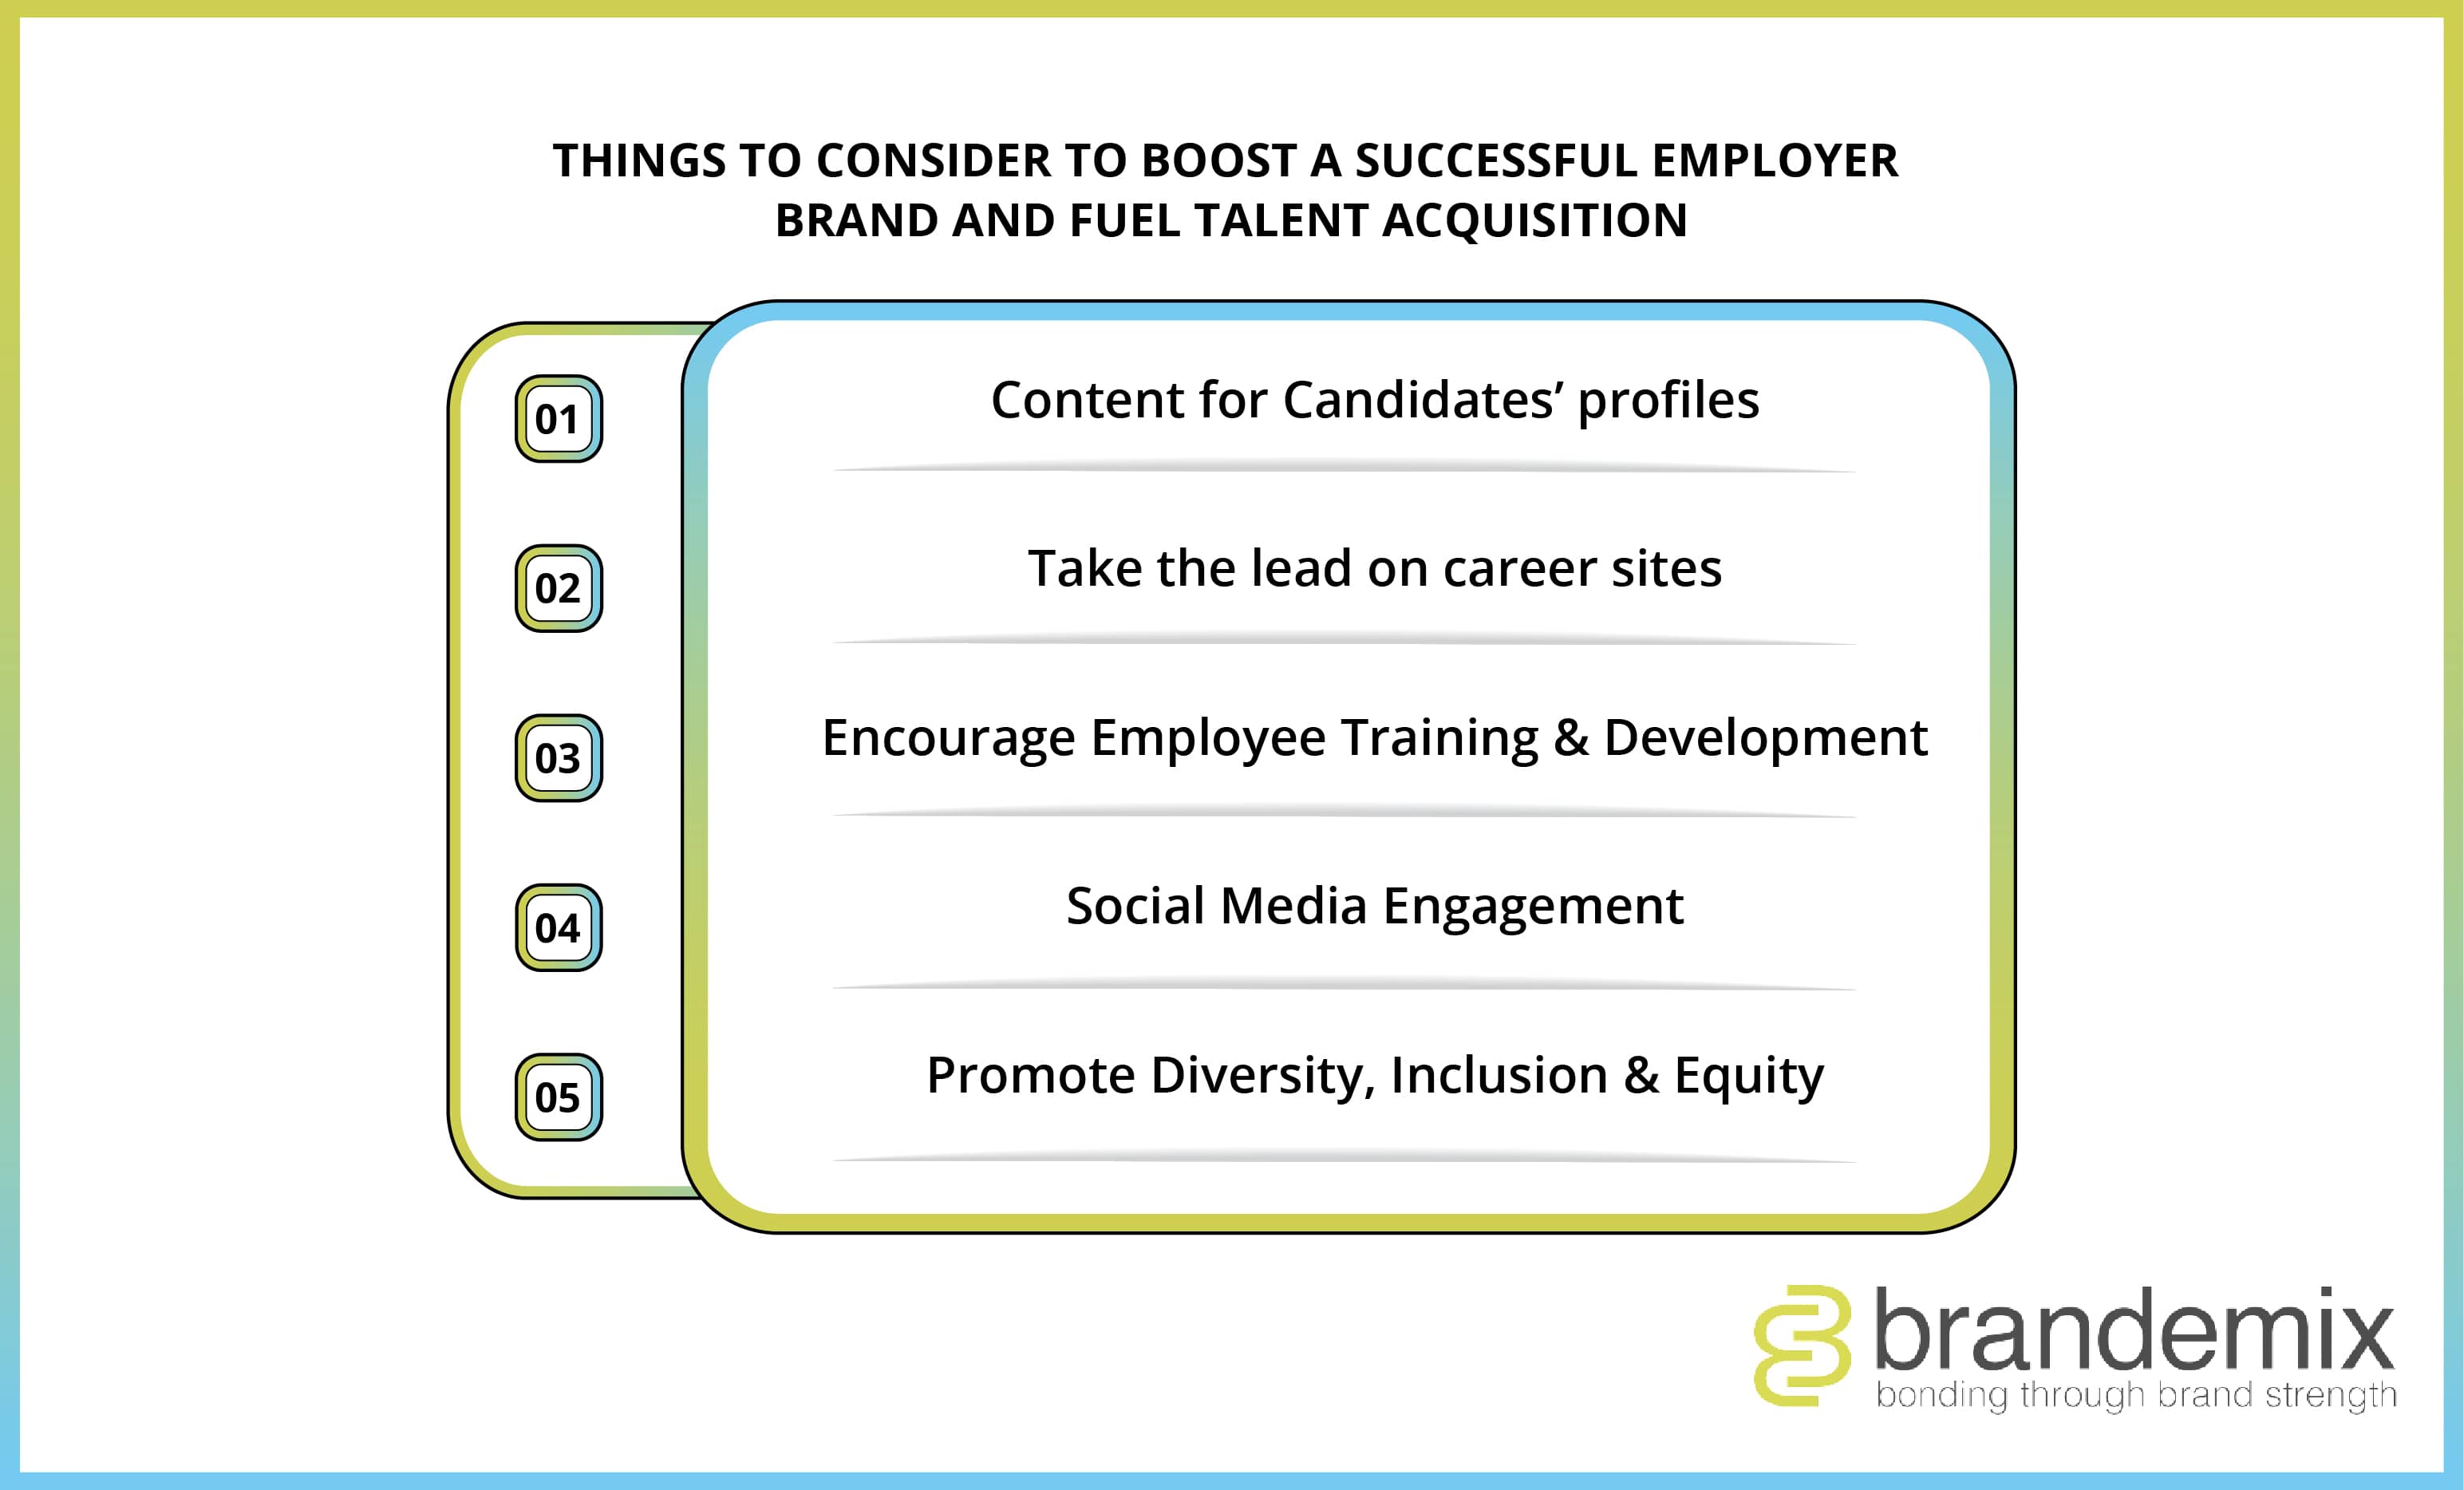 Things to Consider to Boost a Successful Employer Brand